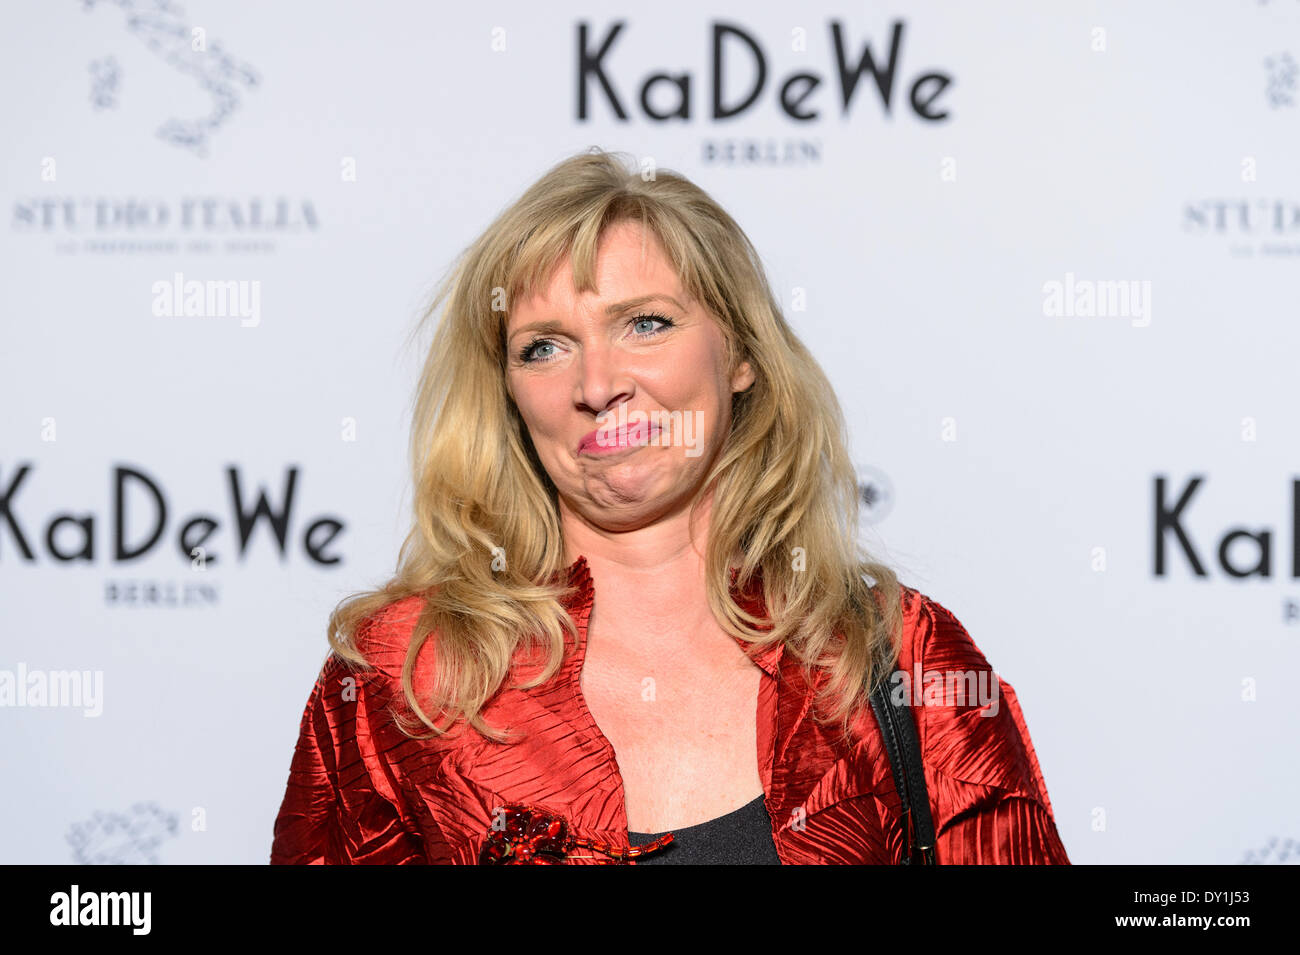 Berlin, Germany. 2nd Apr, 2014. Nanna Kuckuck attends the 'Studio Italia - La Perfezione del Gusto' grand opening at KaDeWe on April 2, 2014 in Berlin, Germany. Photo: picture alliance/Robert Schlesinger/picture alliance/dpa/Alamy Live News Stock Photo